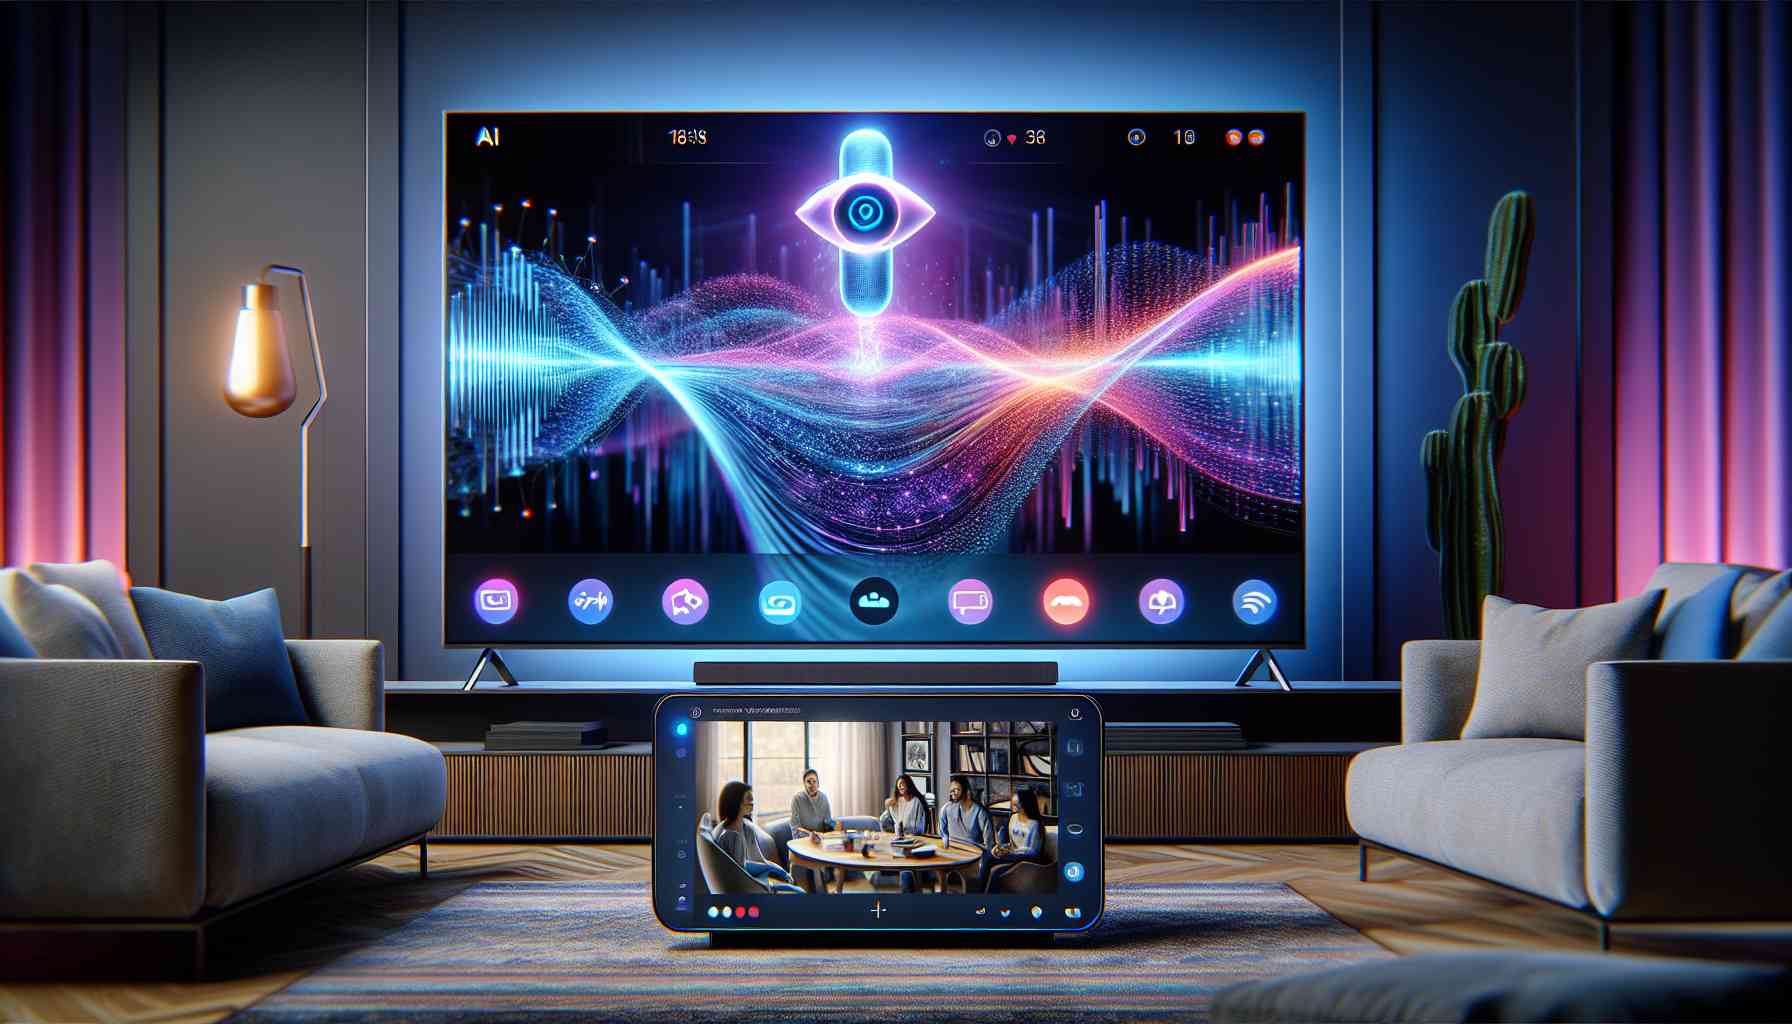 Telly Introduces AI-Enabled Voice Assistant and Dual-Screen Zoom Calls to Enhance User Experience